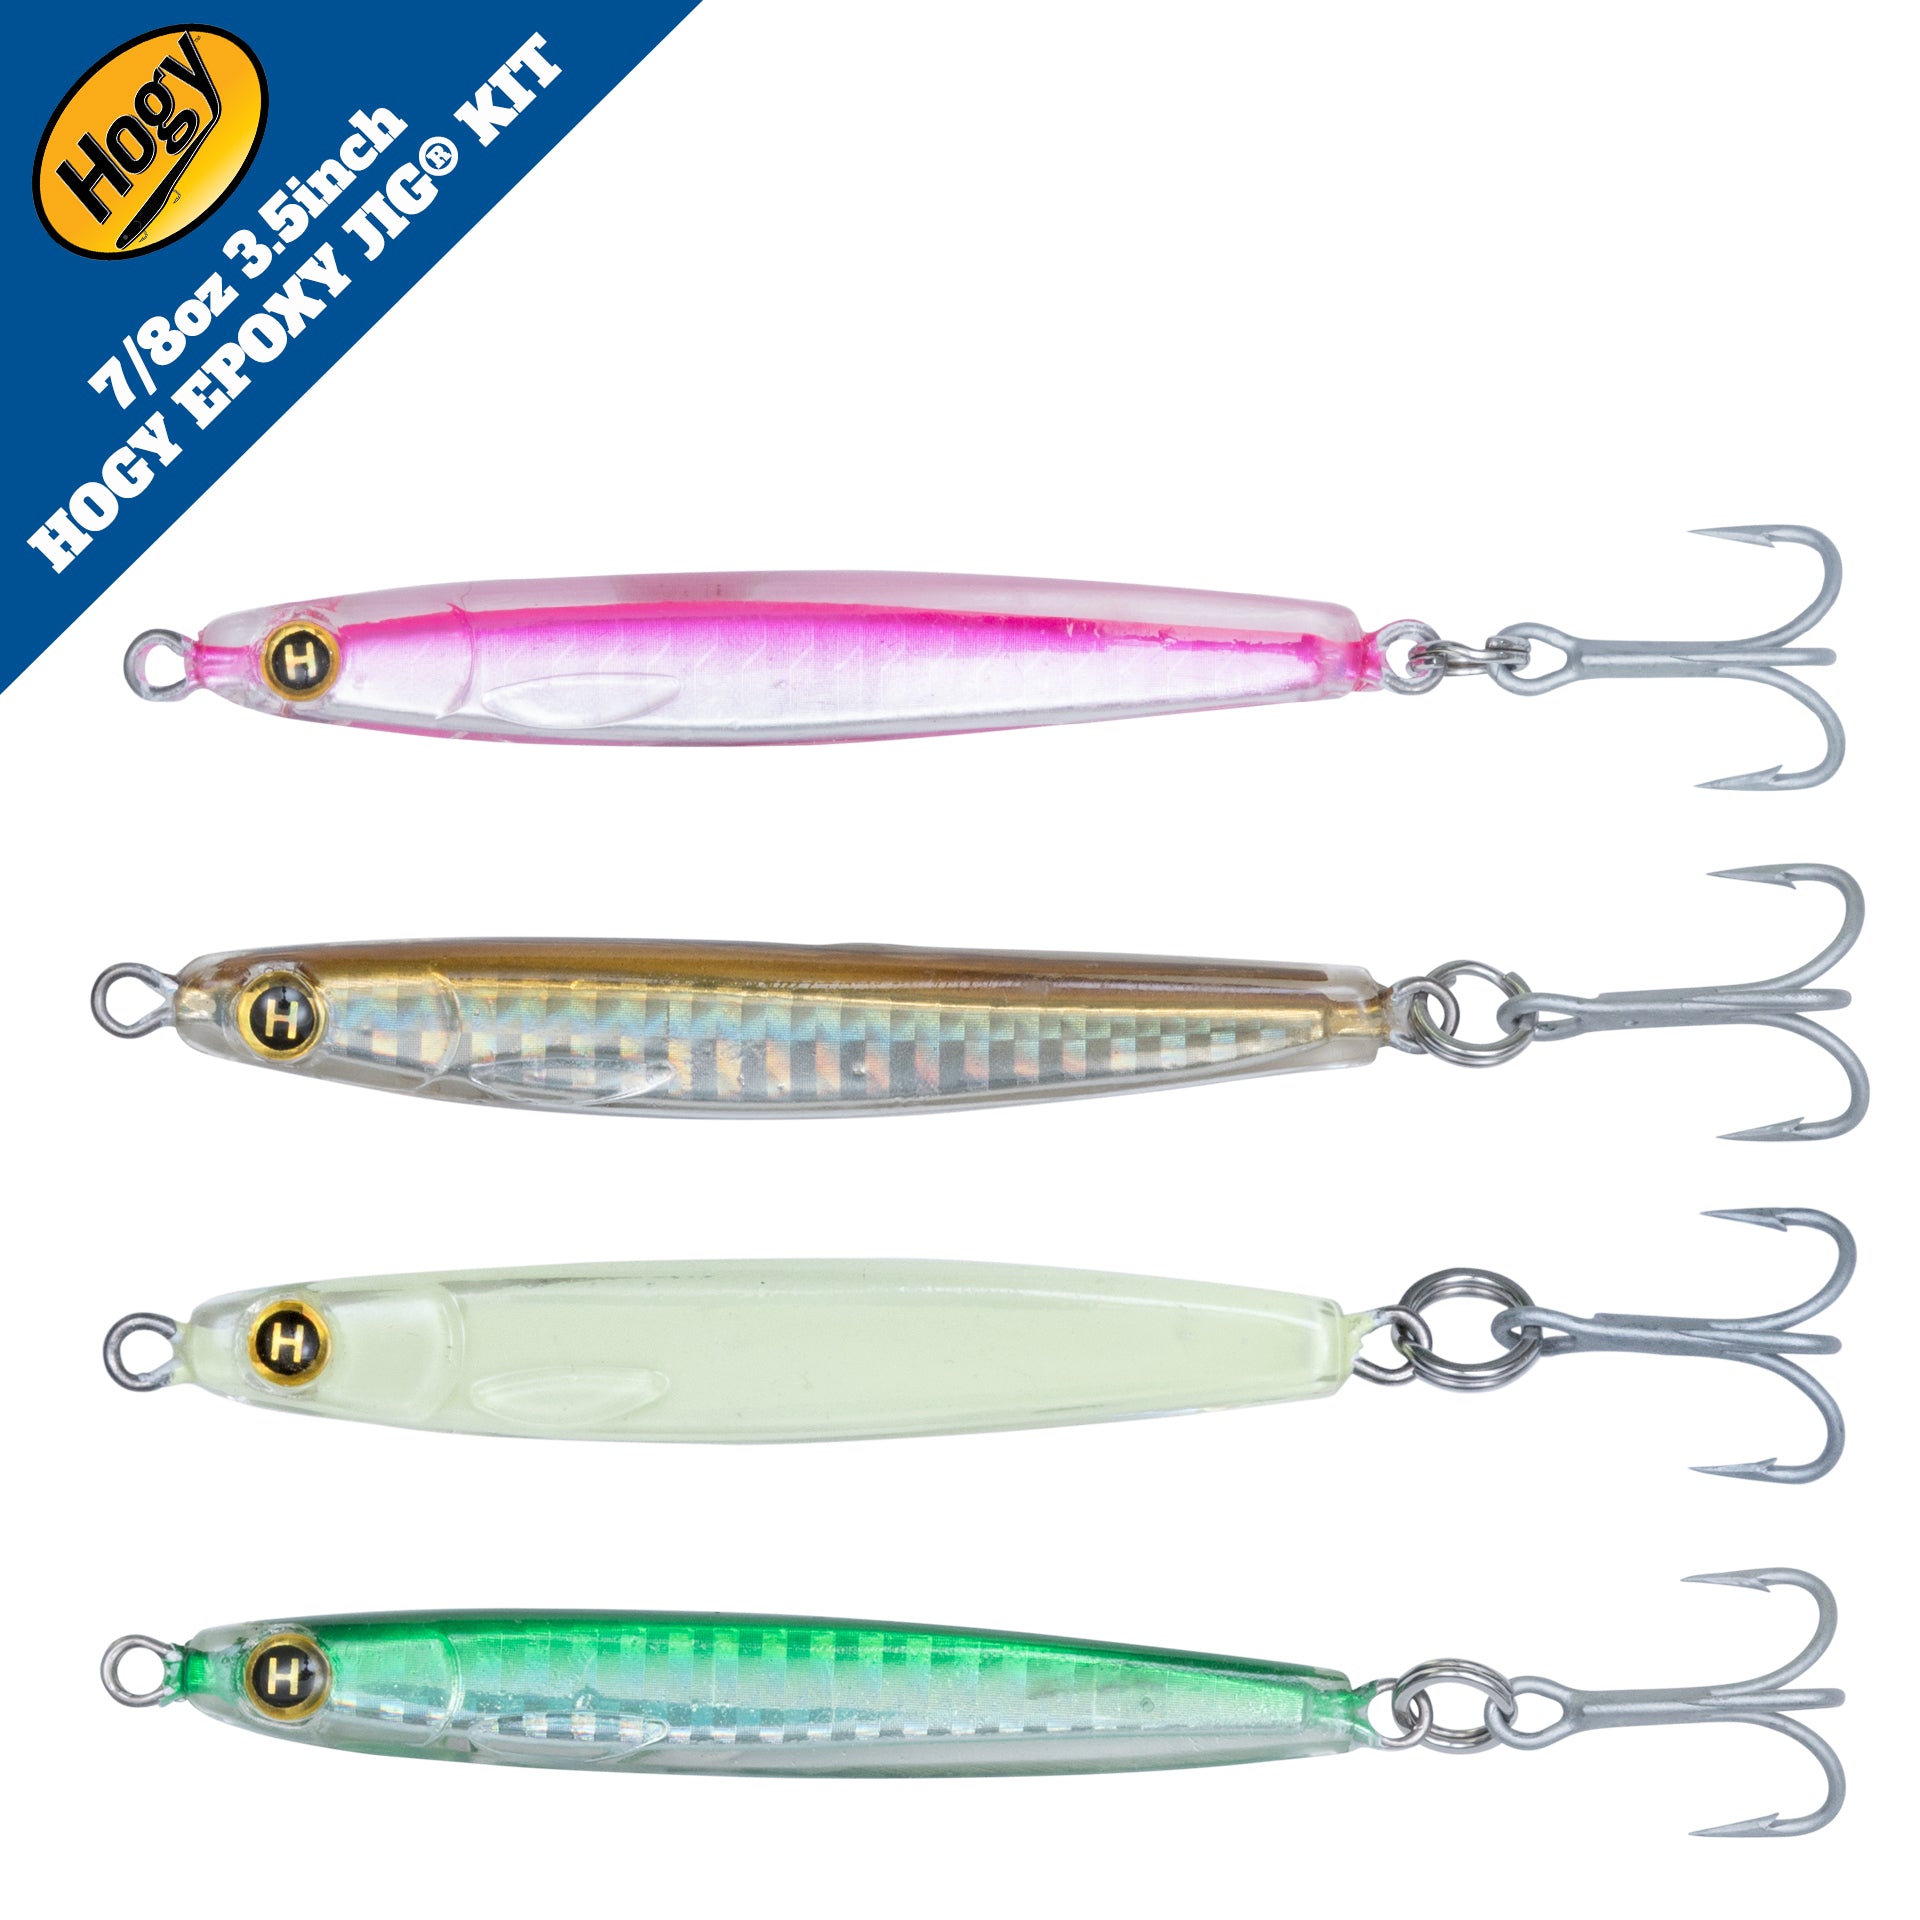 Upstart Epoxy Art Resin, mixing and clear coating custom-painted fishing  lures 